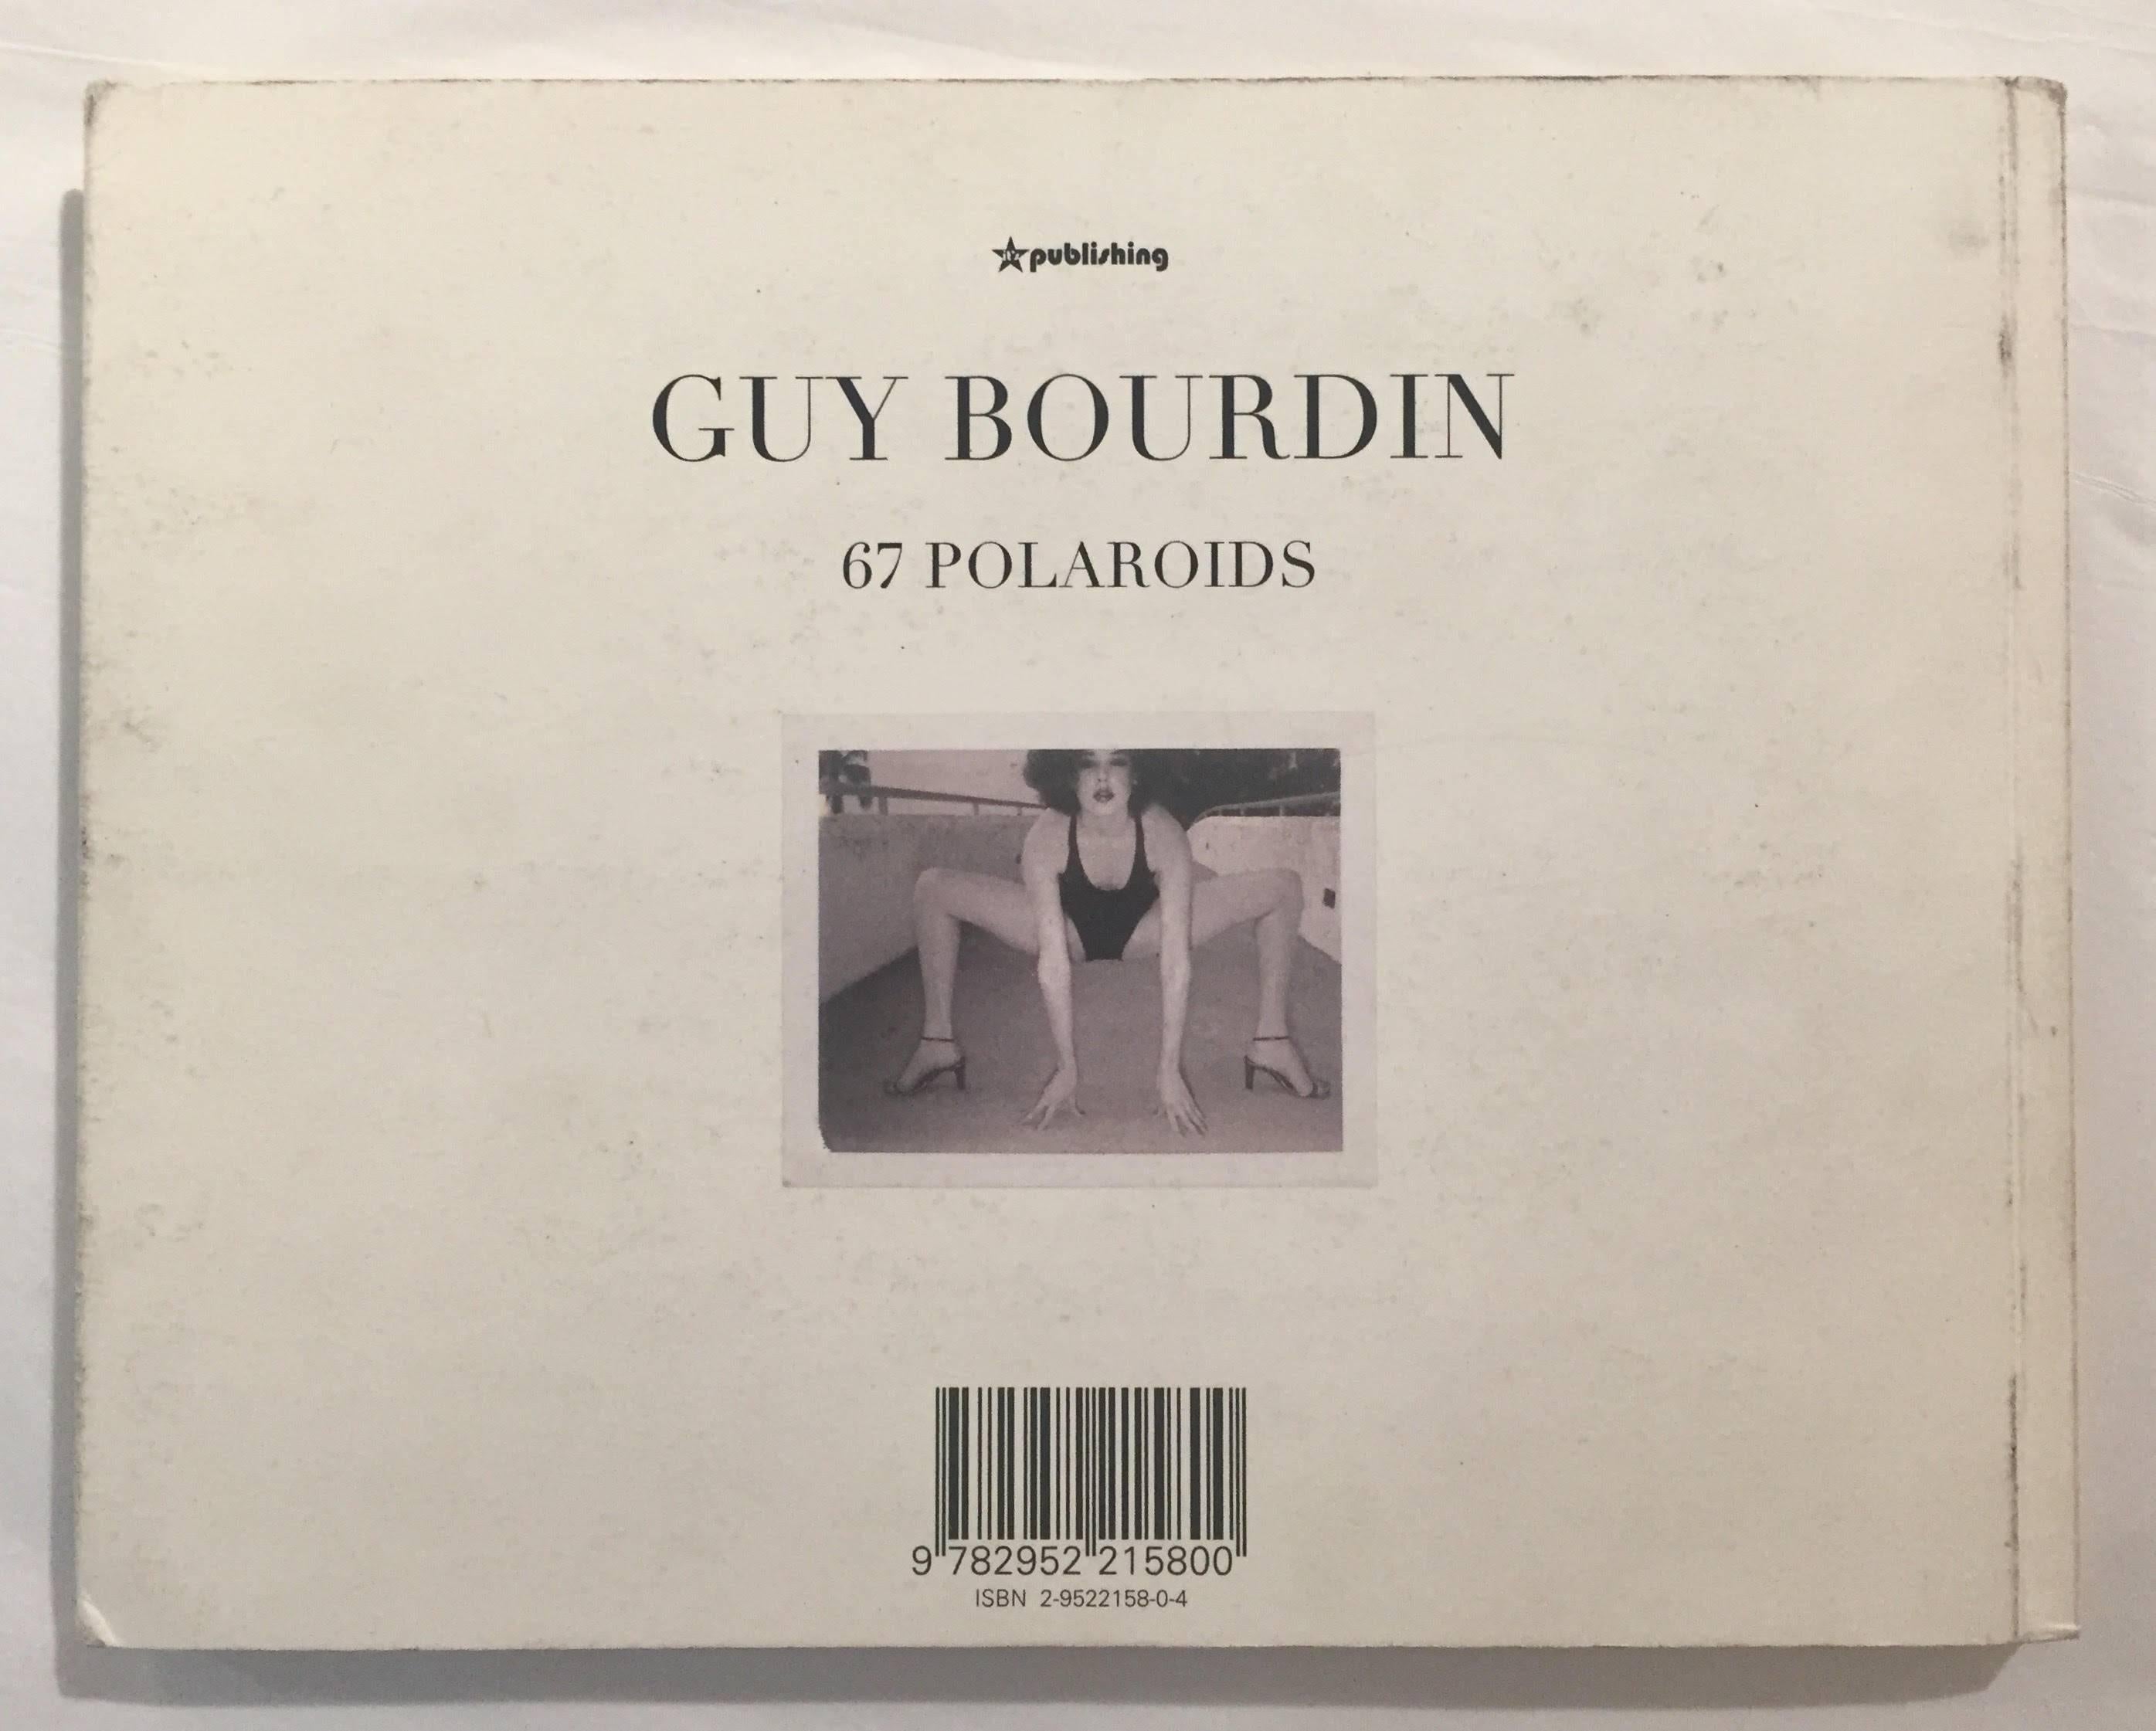 One of the acknowledged masters of Polaroid; Guy Bourdin (1928-1991) brought to the medium an uncanny ability to combine the snapshot feel with a strong patina of glamour and sexiness. Only 1000 copies were made - however, a complaint was made by